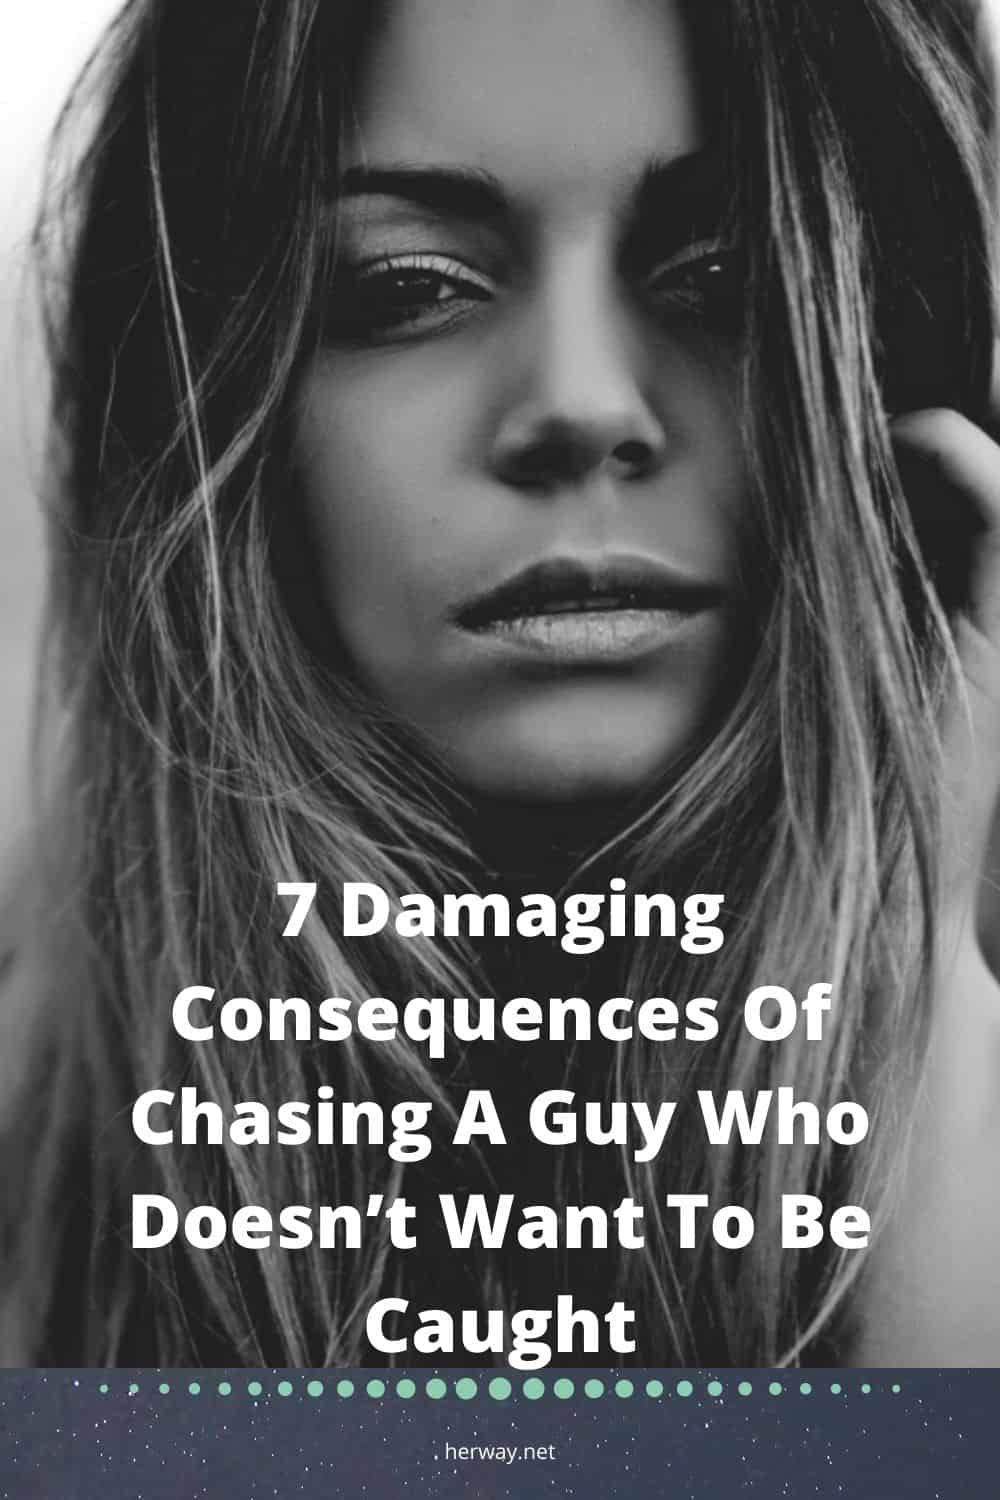 7 Damaging Consequences Of Chasing A Guy Who Doesn’t Want To Be Caught